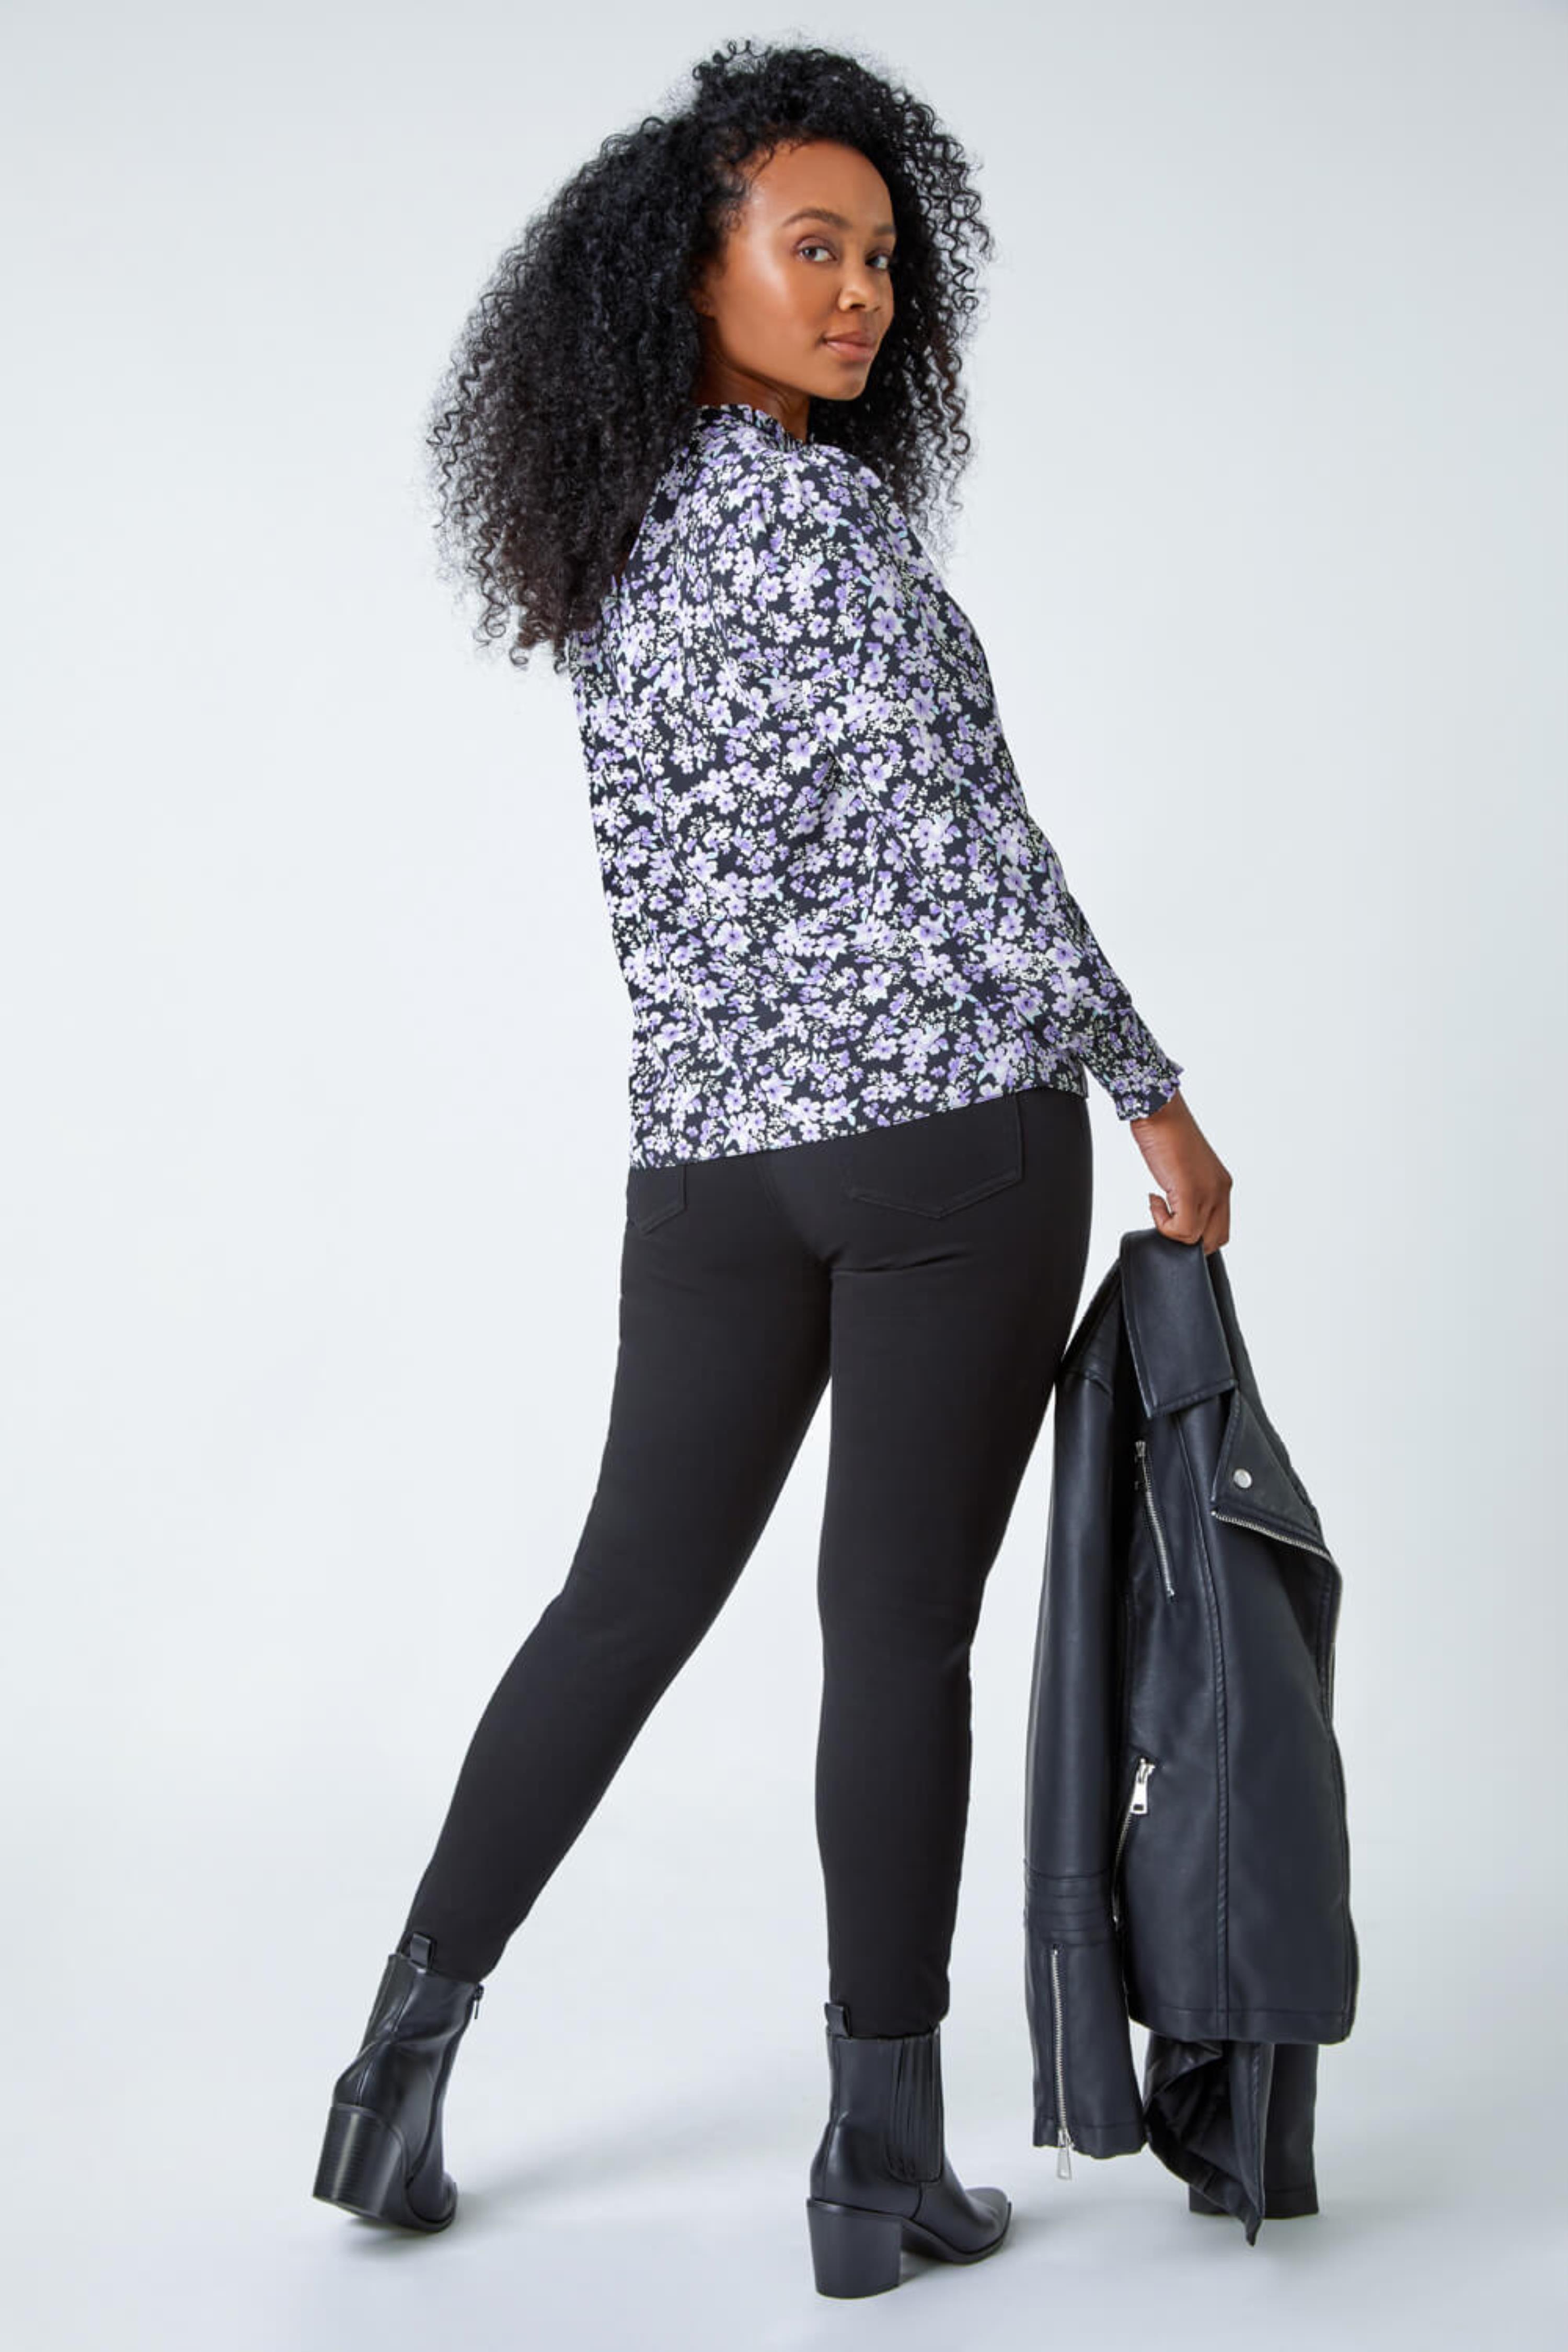 Lilac Petite Floral Print Gathered Neck Top, Image 3 of 5